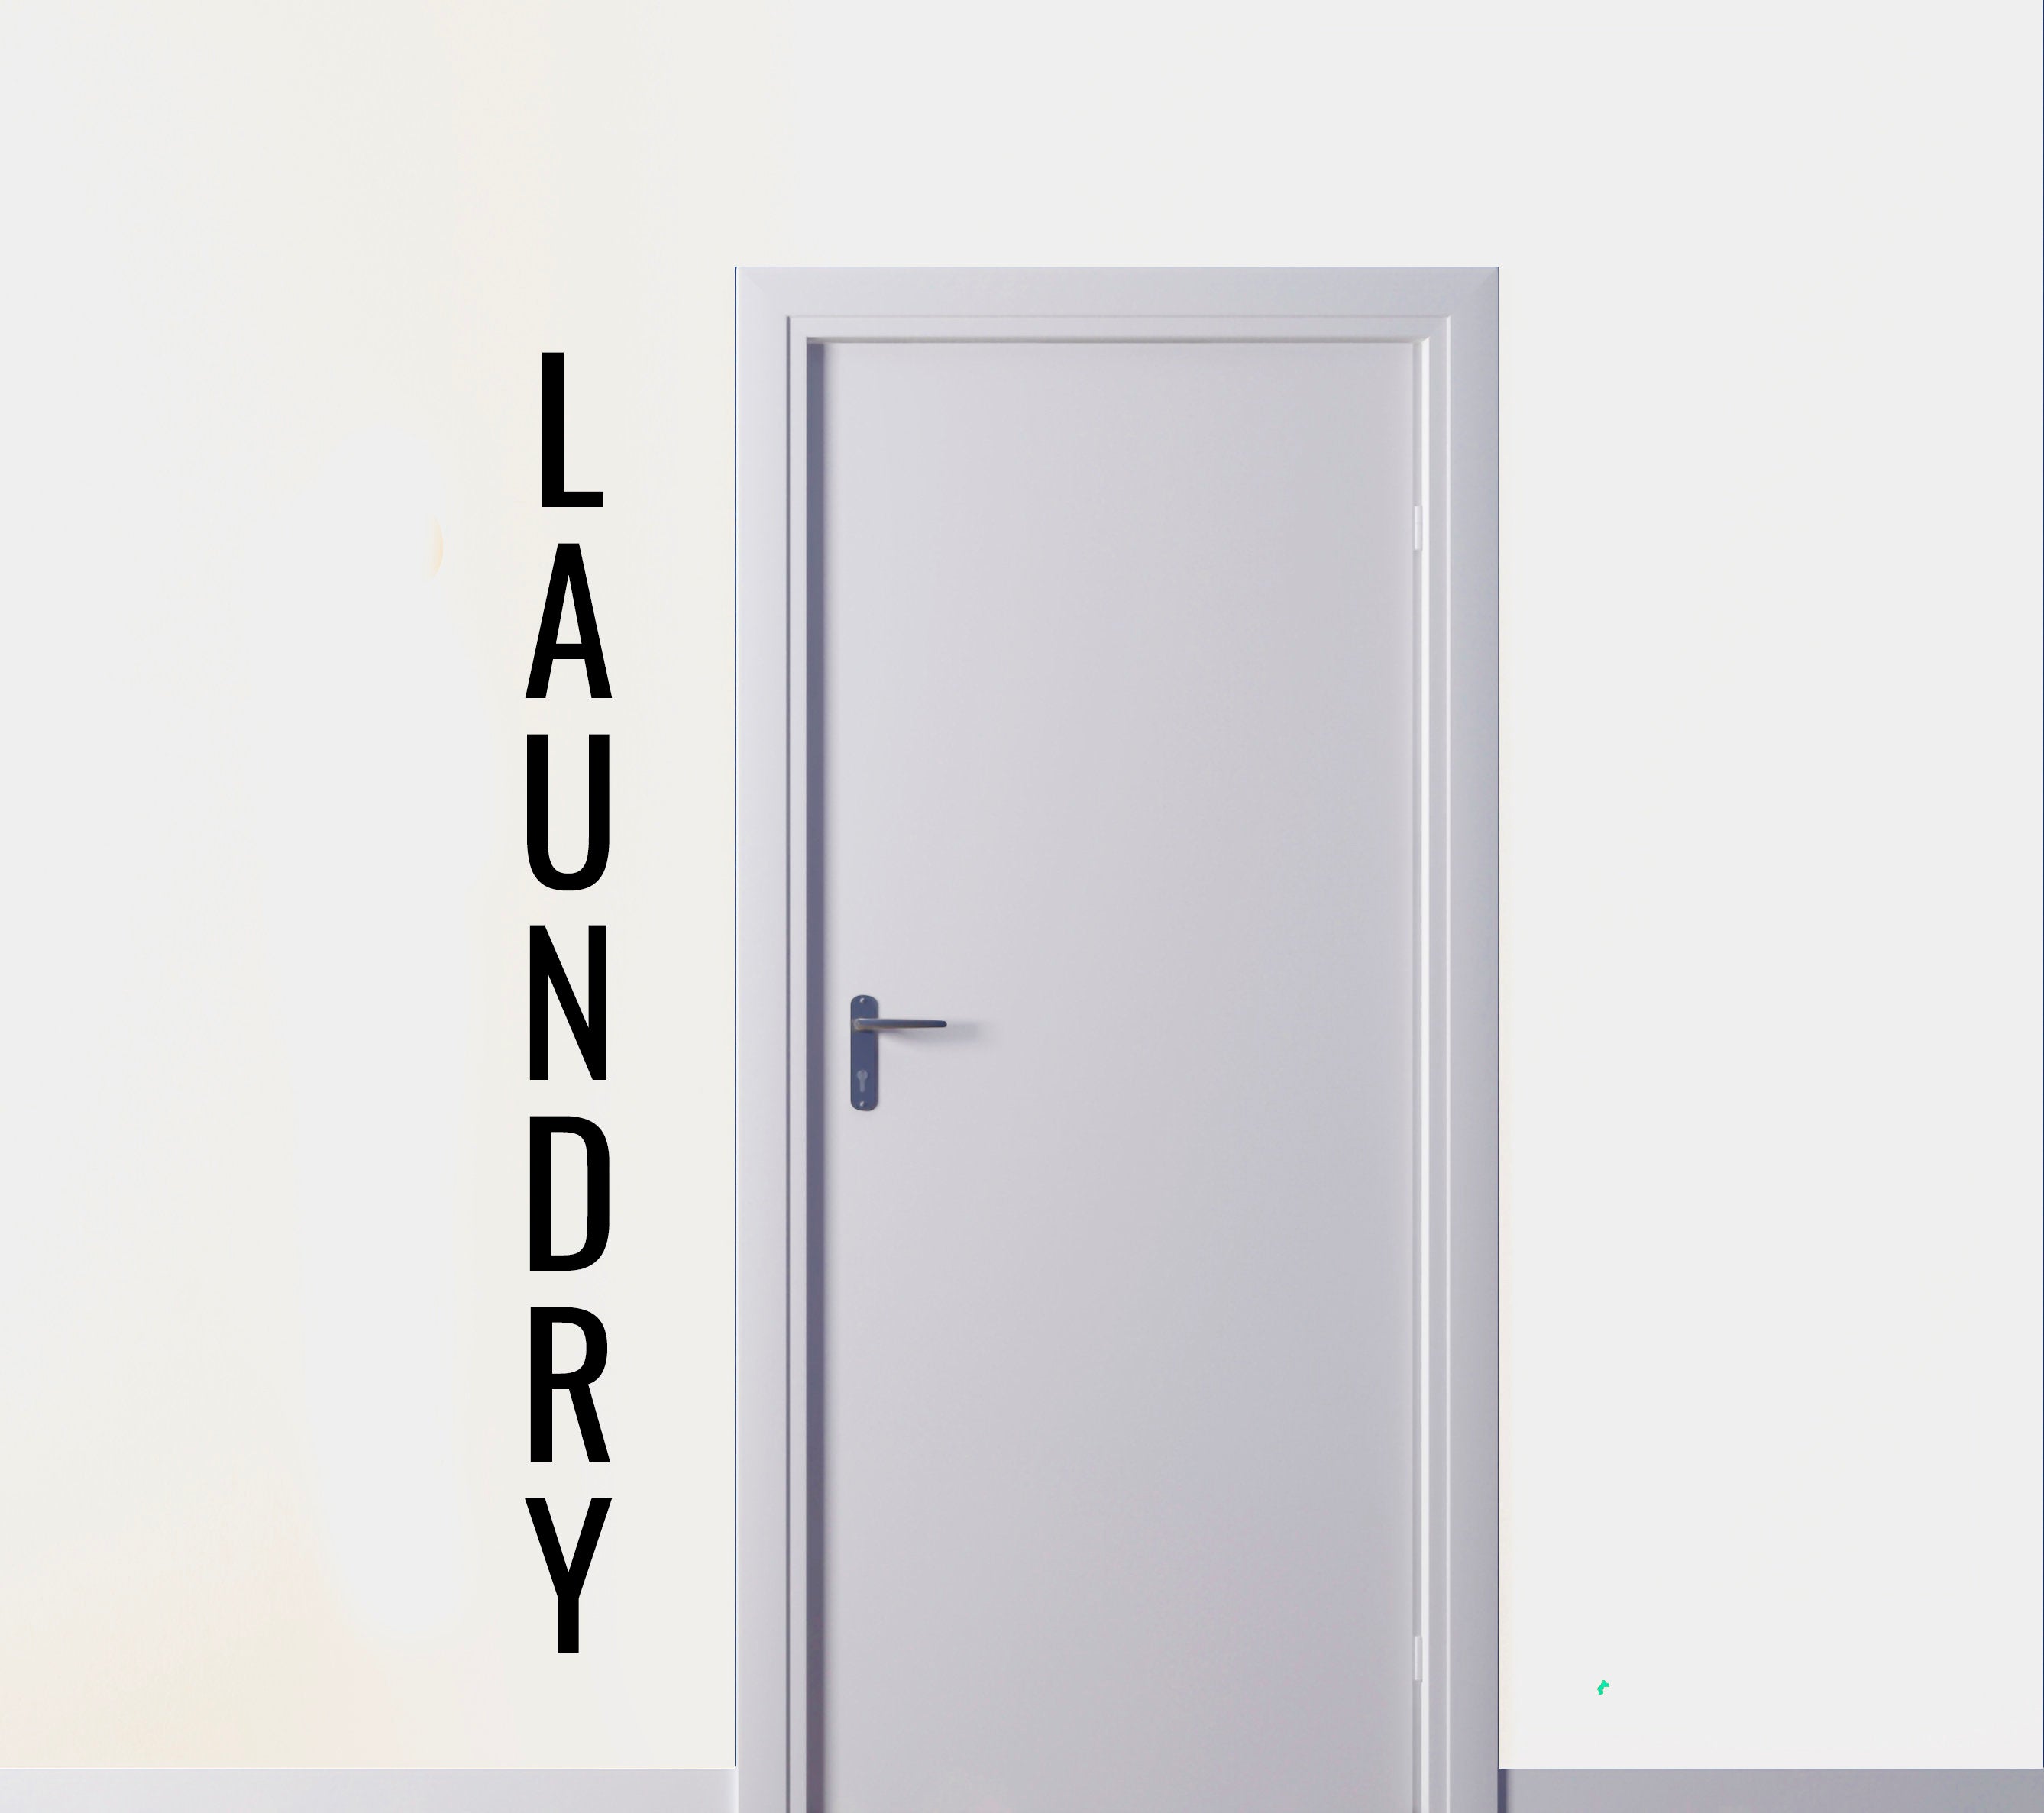 Vertical Laundry Sign - Vinyl Decal for Laundry Room, Hotels, Condominiums, Apartments, Etc!